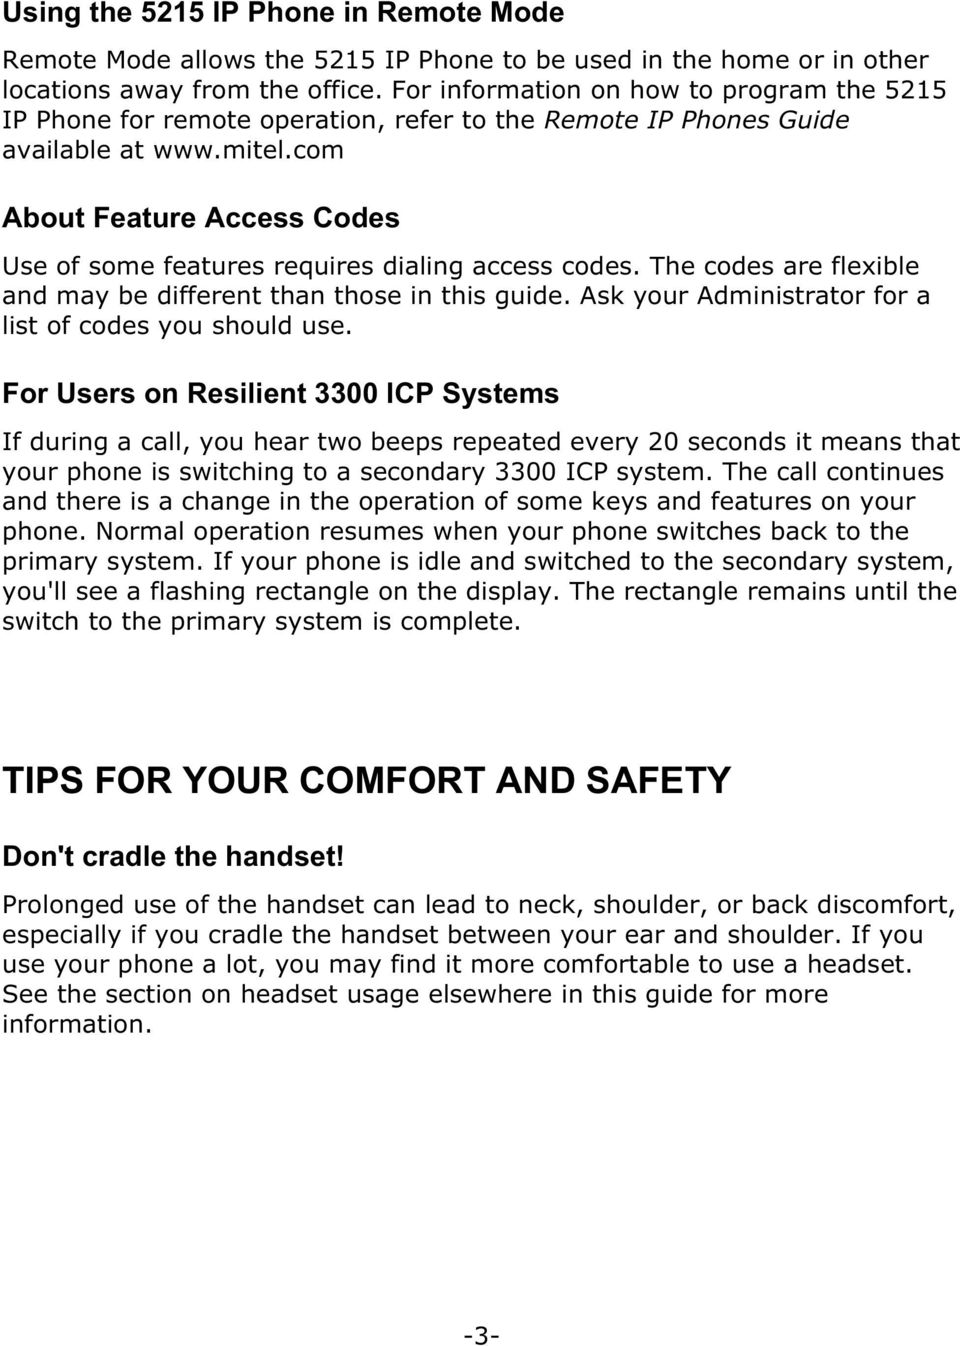 com About Feature Access Codes Use of some features requires dialing access codes. The codes are flexible and may be different than those in this guide.